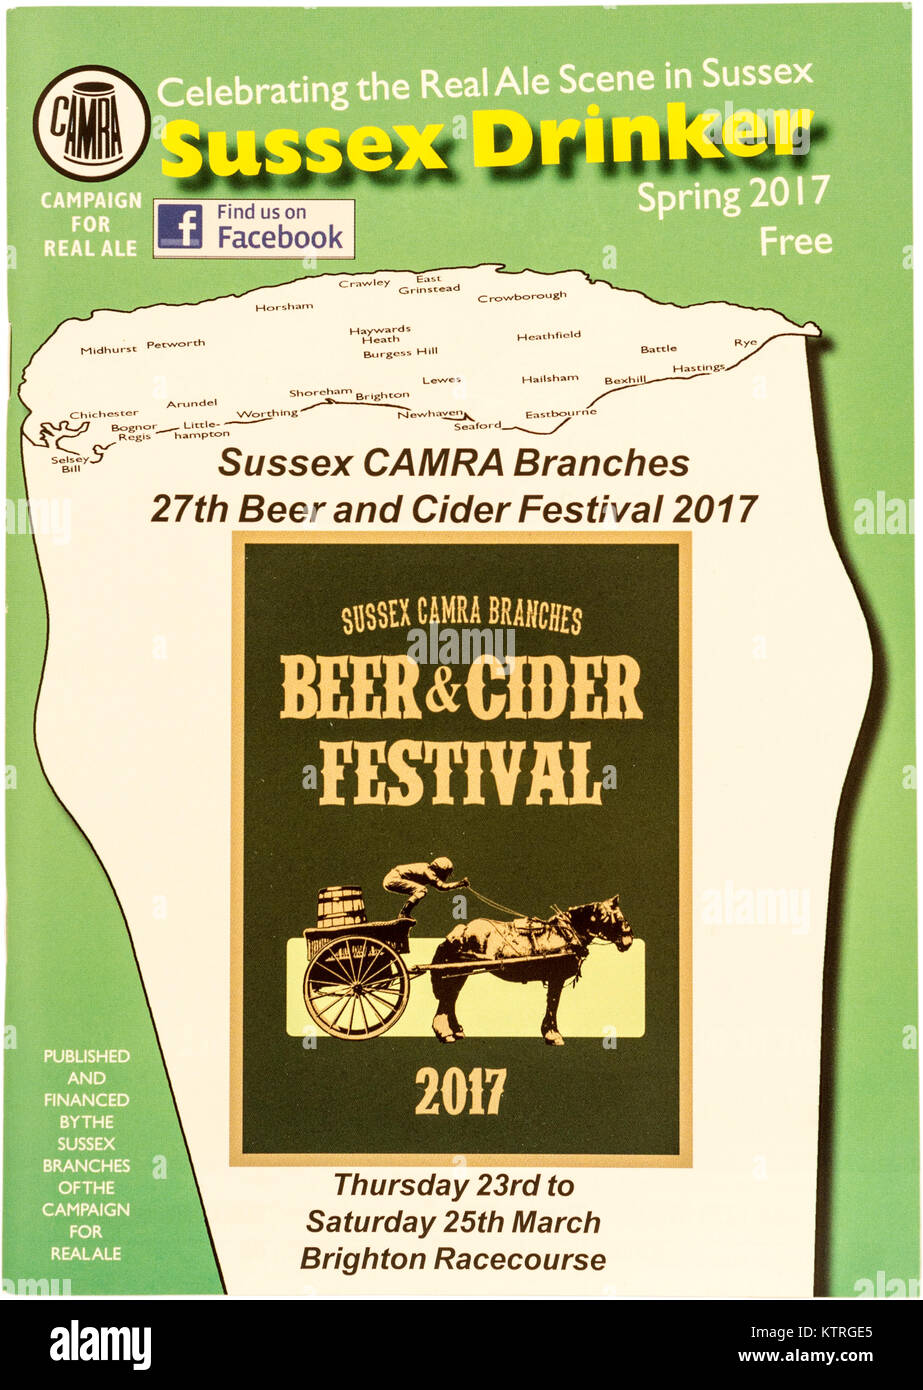 Sussex Drinker - CAMRA (Campaign for Real Ale) magazine / news pamphlet for Sussex - Spring 2017. Stock Photo